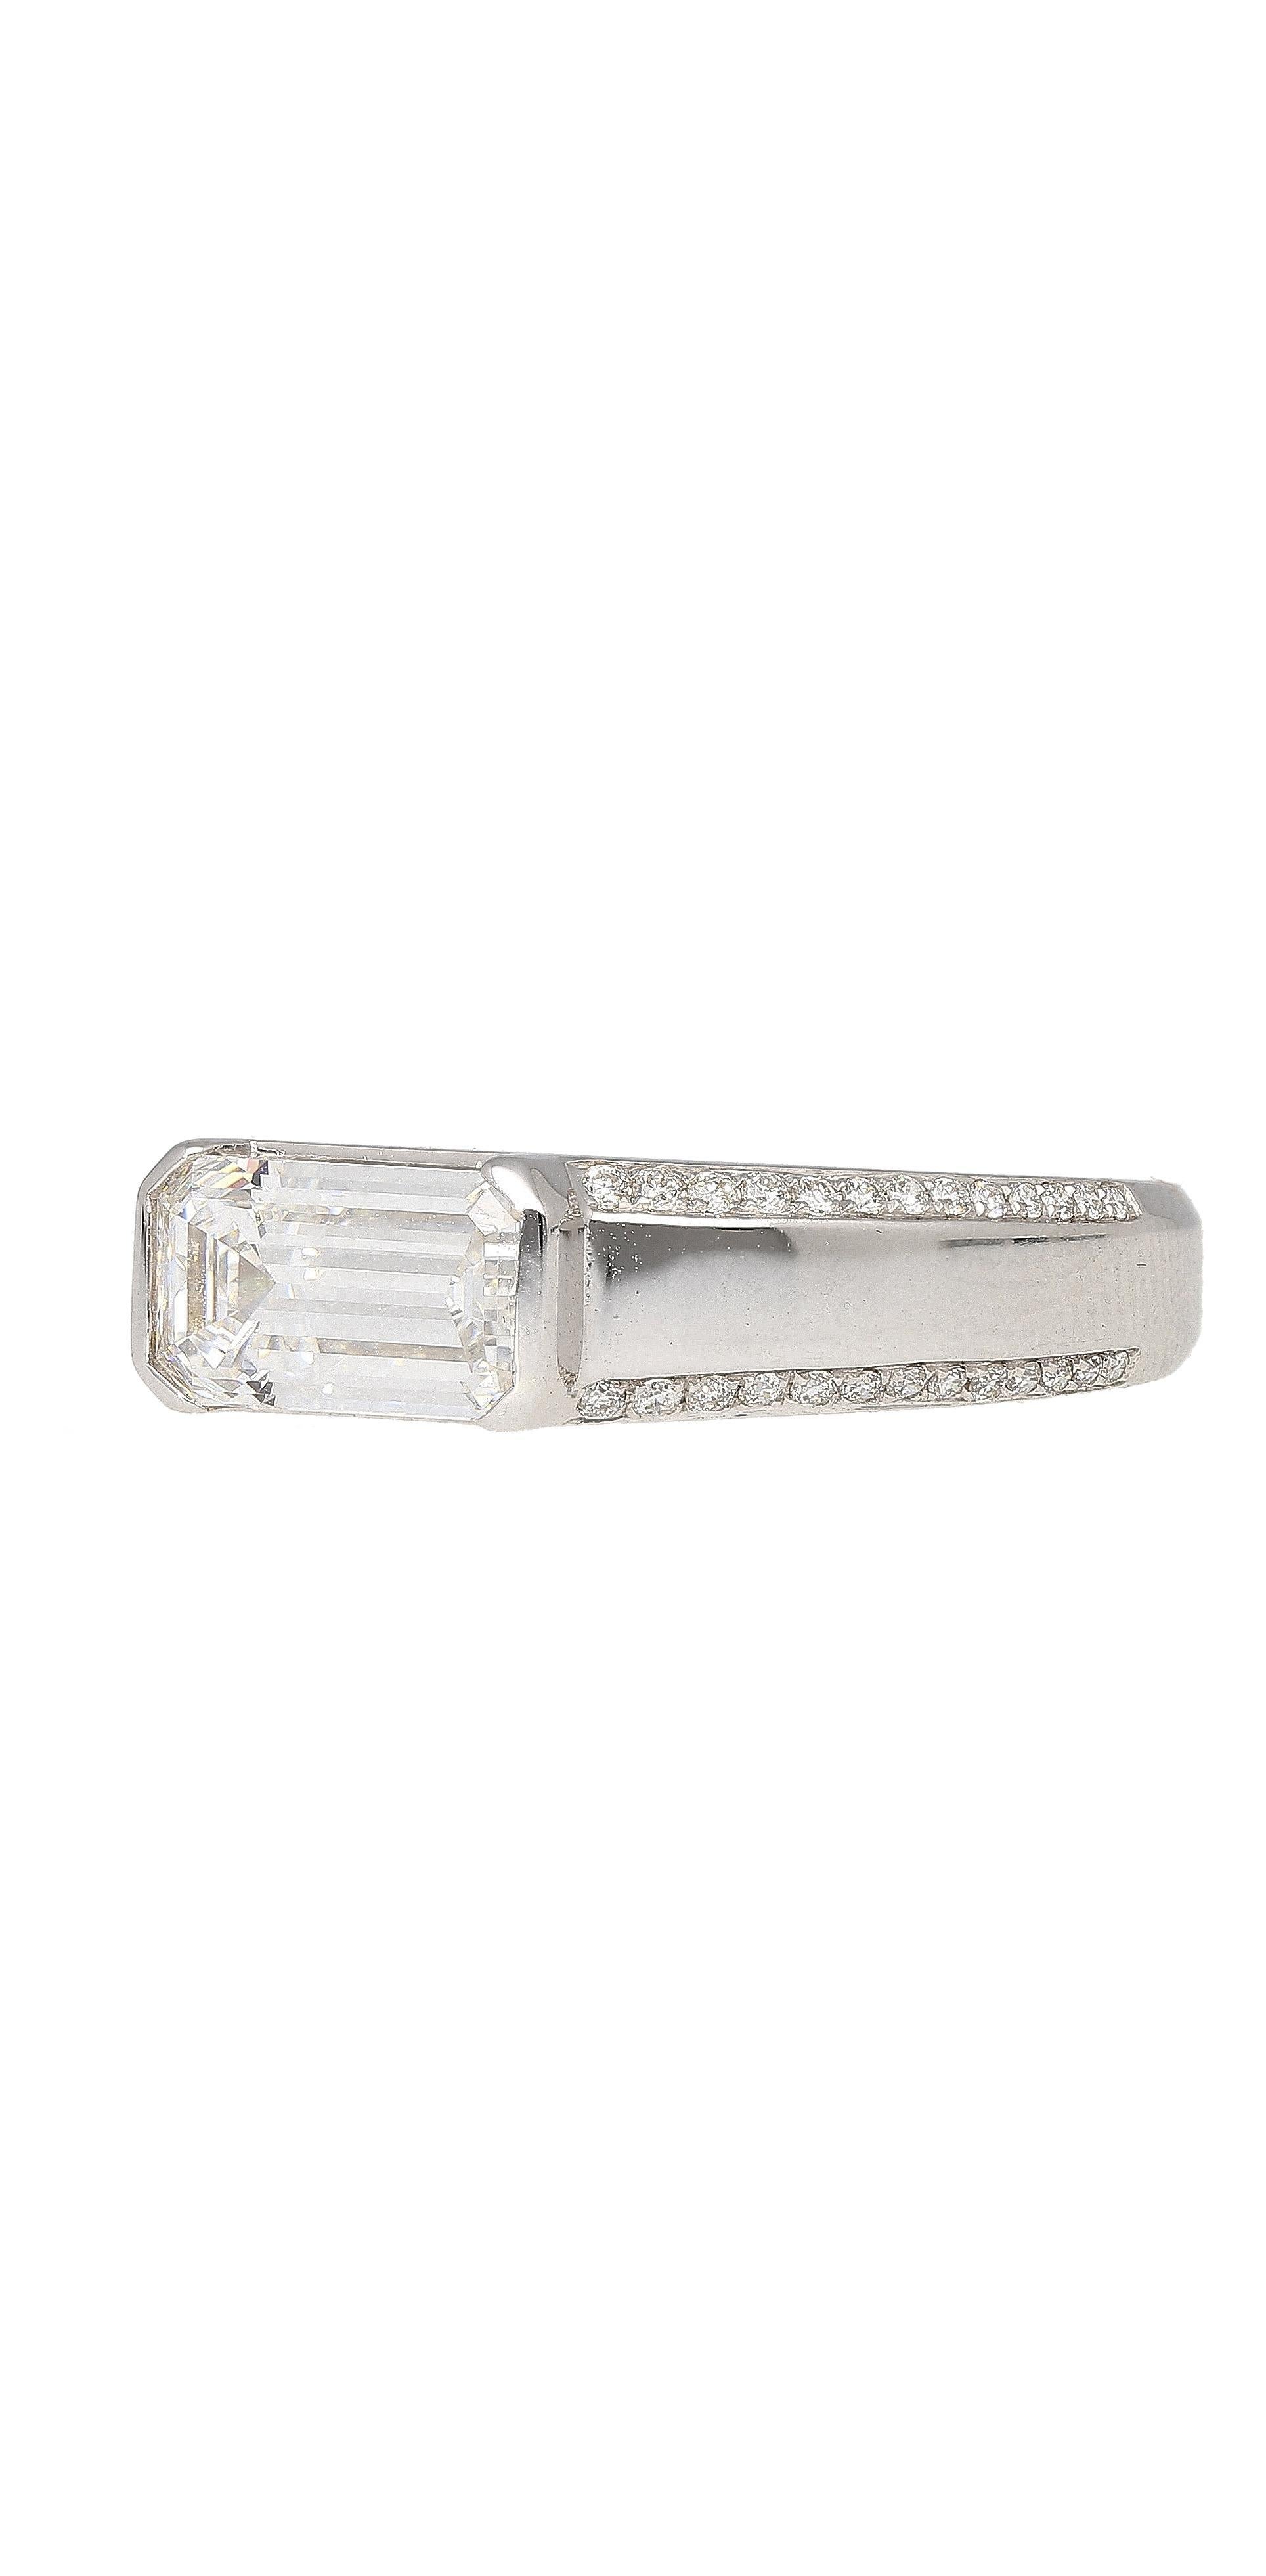 GIA Certified 1.33 Carat, Emerald Cut, D color, VVS2 clarity, Natural Diamond East West Set Band Ring in 18K white gold. Featuring 52 pave set round cut diamond side stones. 

This center stone diamond bears the best possible color grade in the